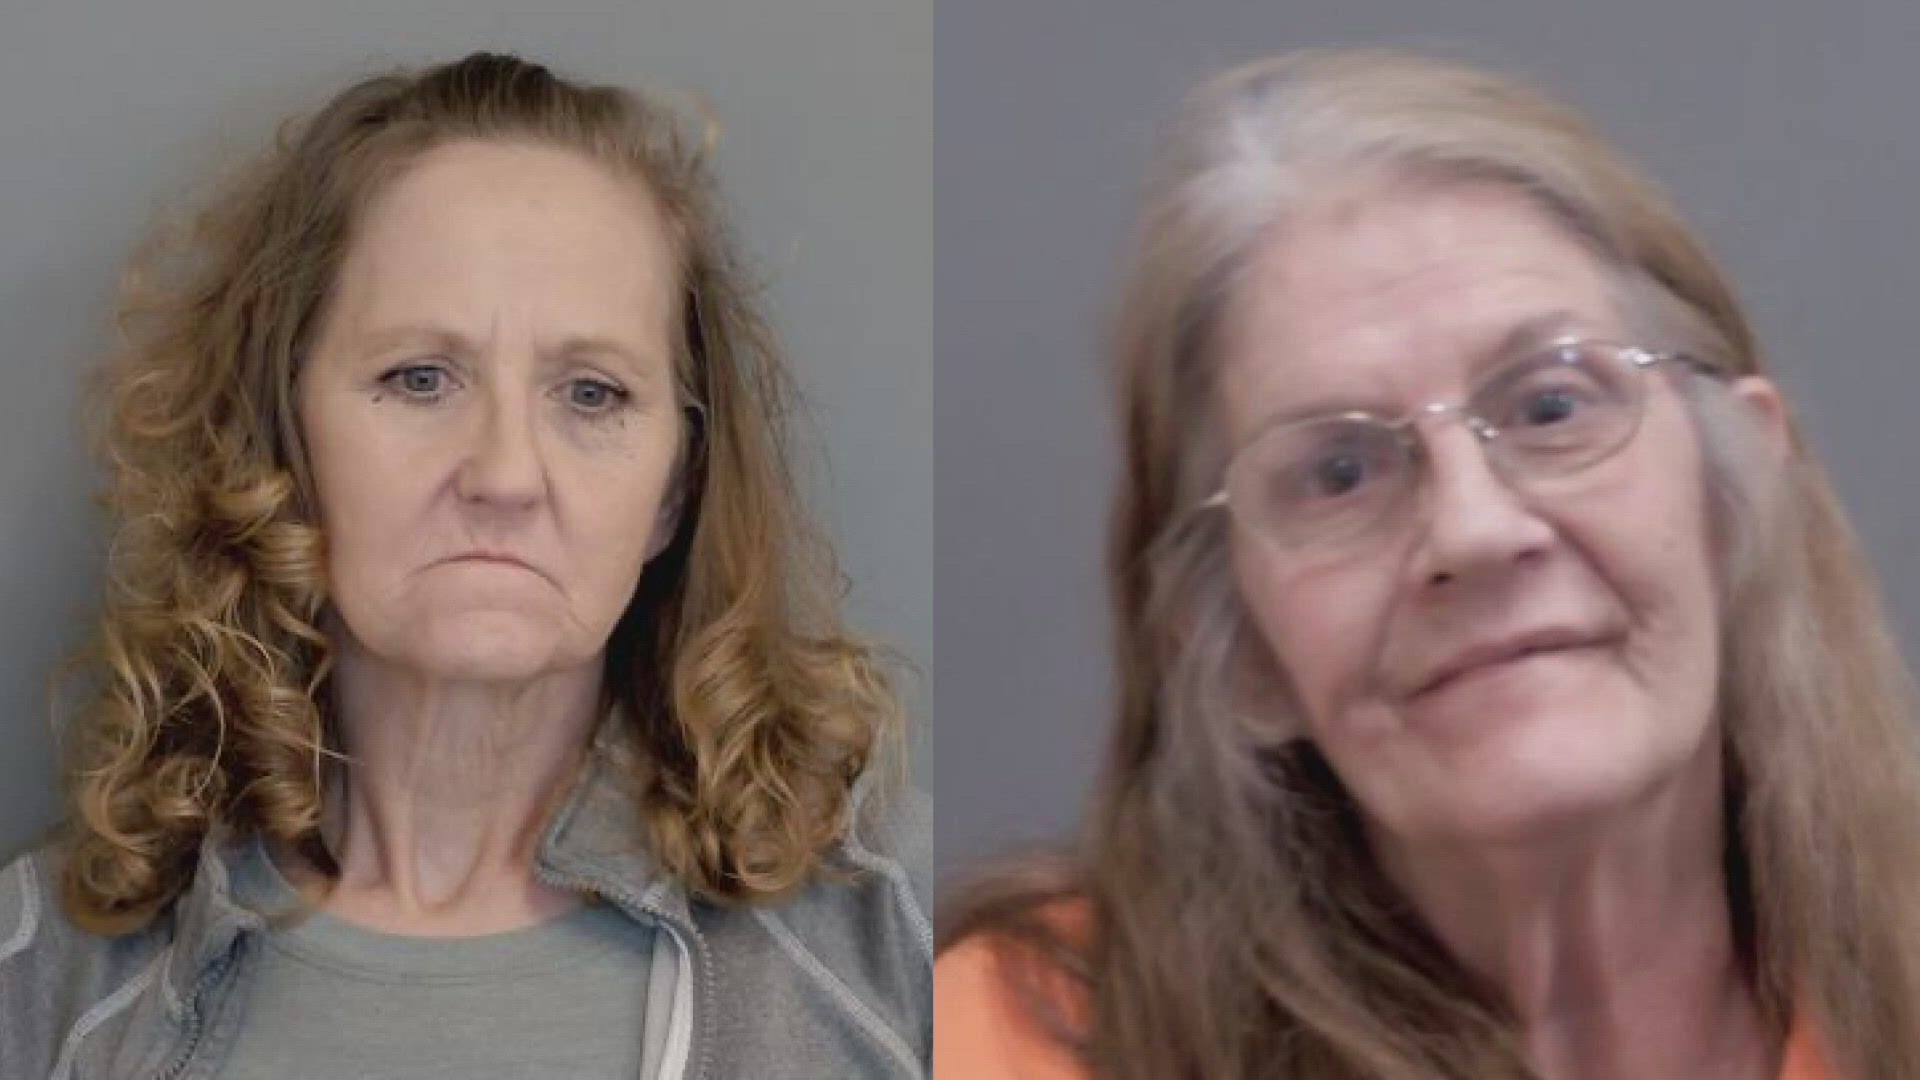 Loreen B. Feralo and Karen Casbohm have been charged with gross abuse of a corpse.